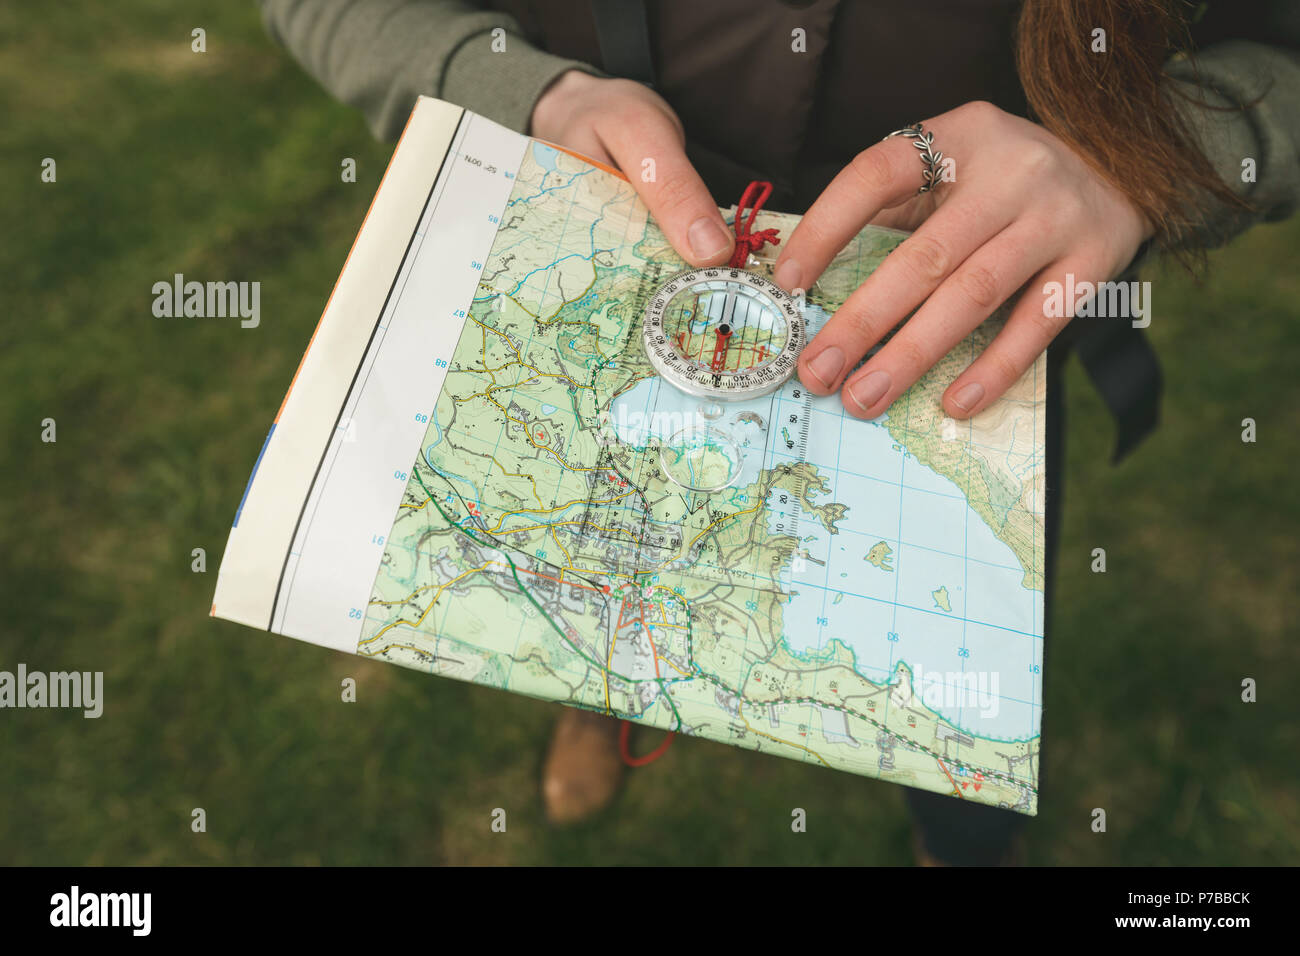 Female hiker reading a map Stock Photo